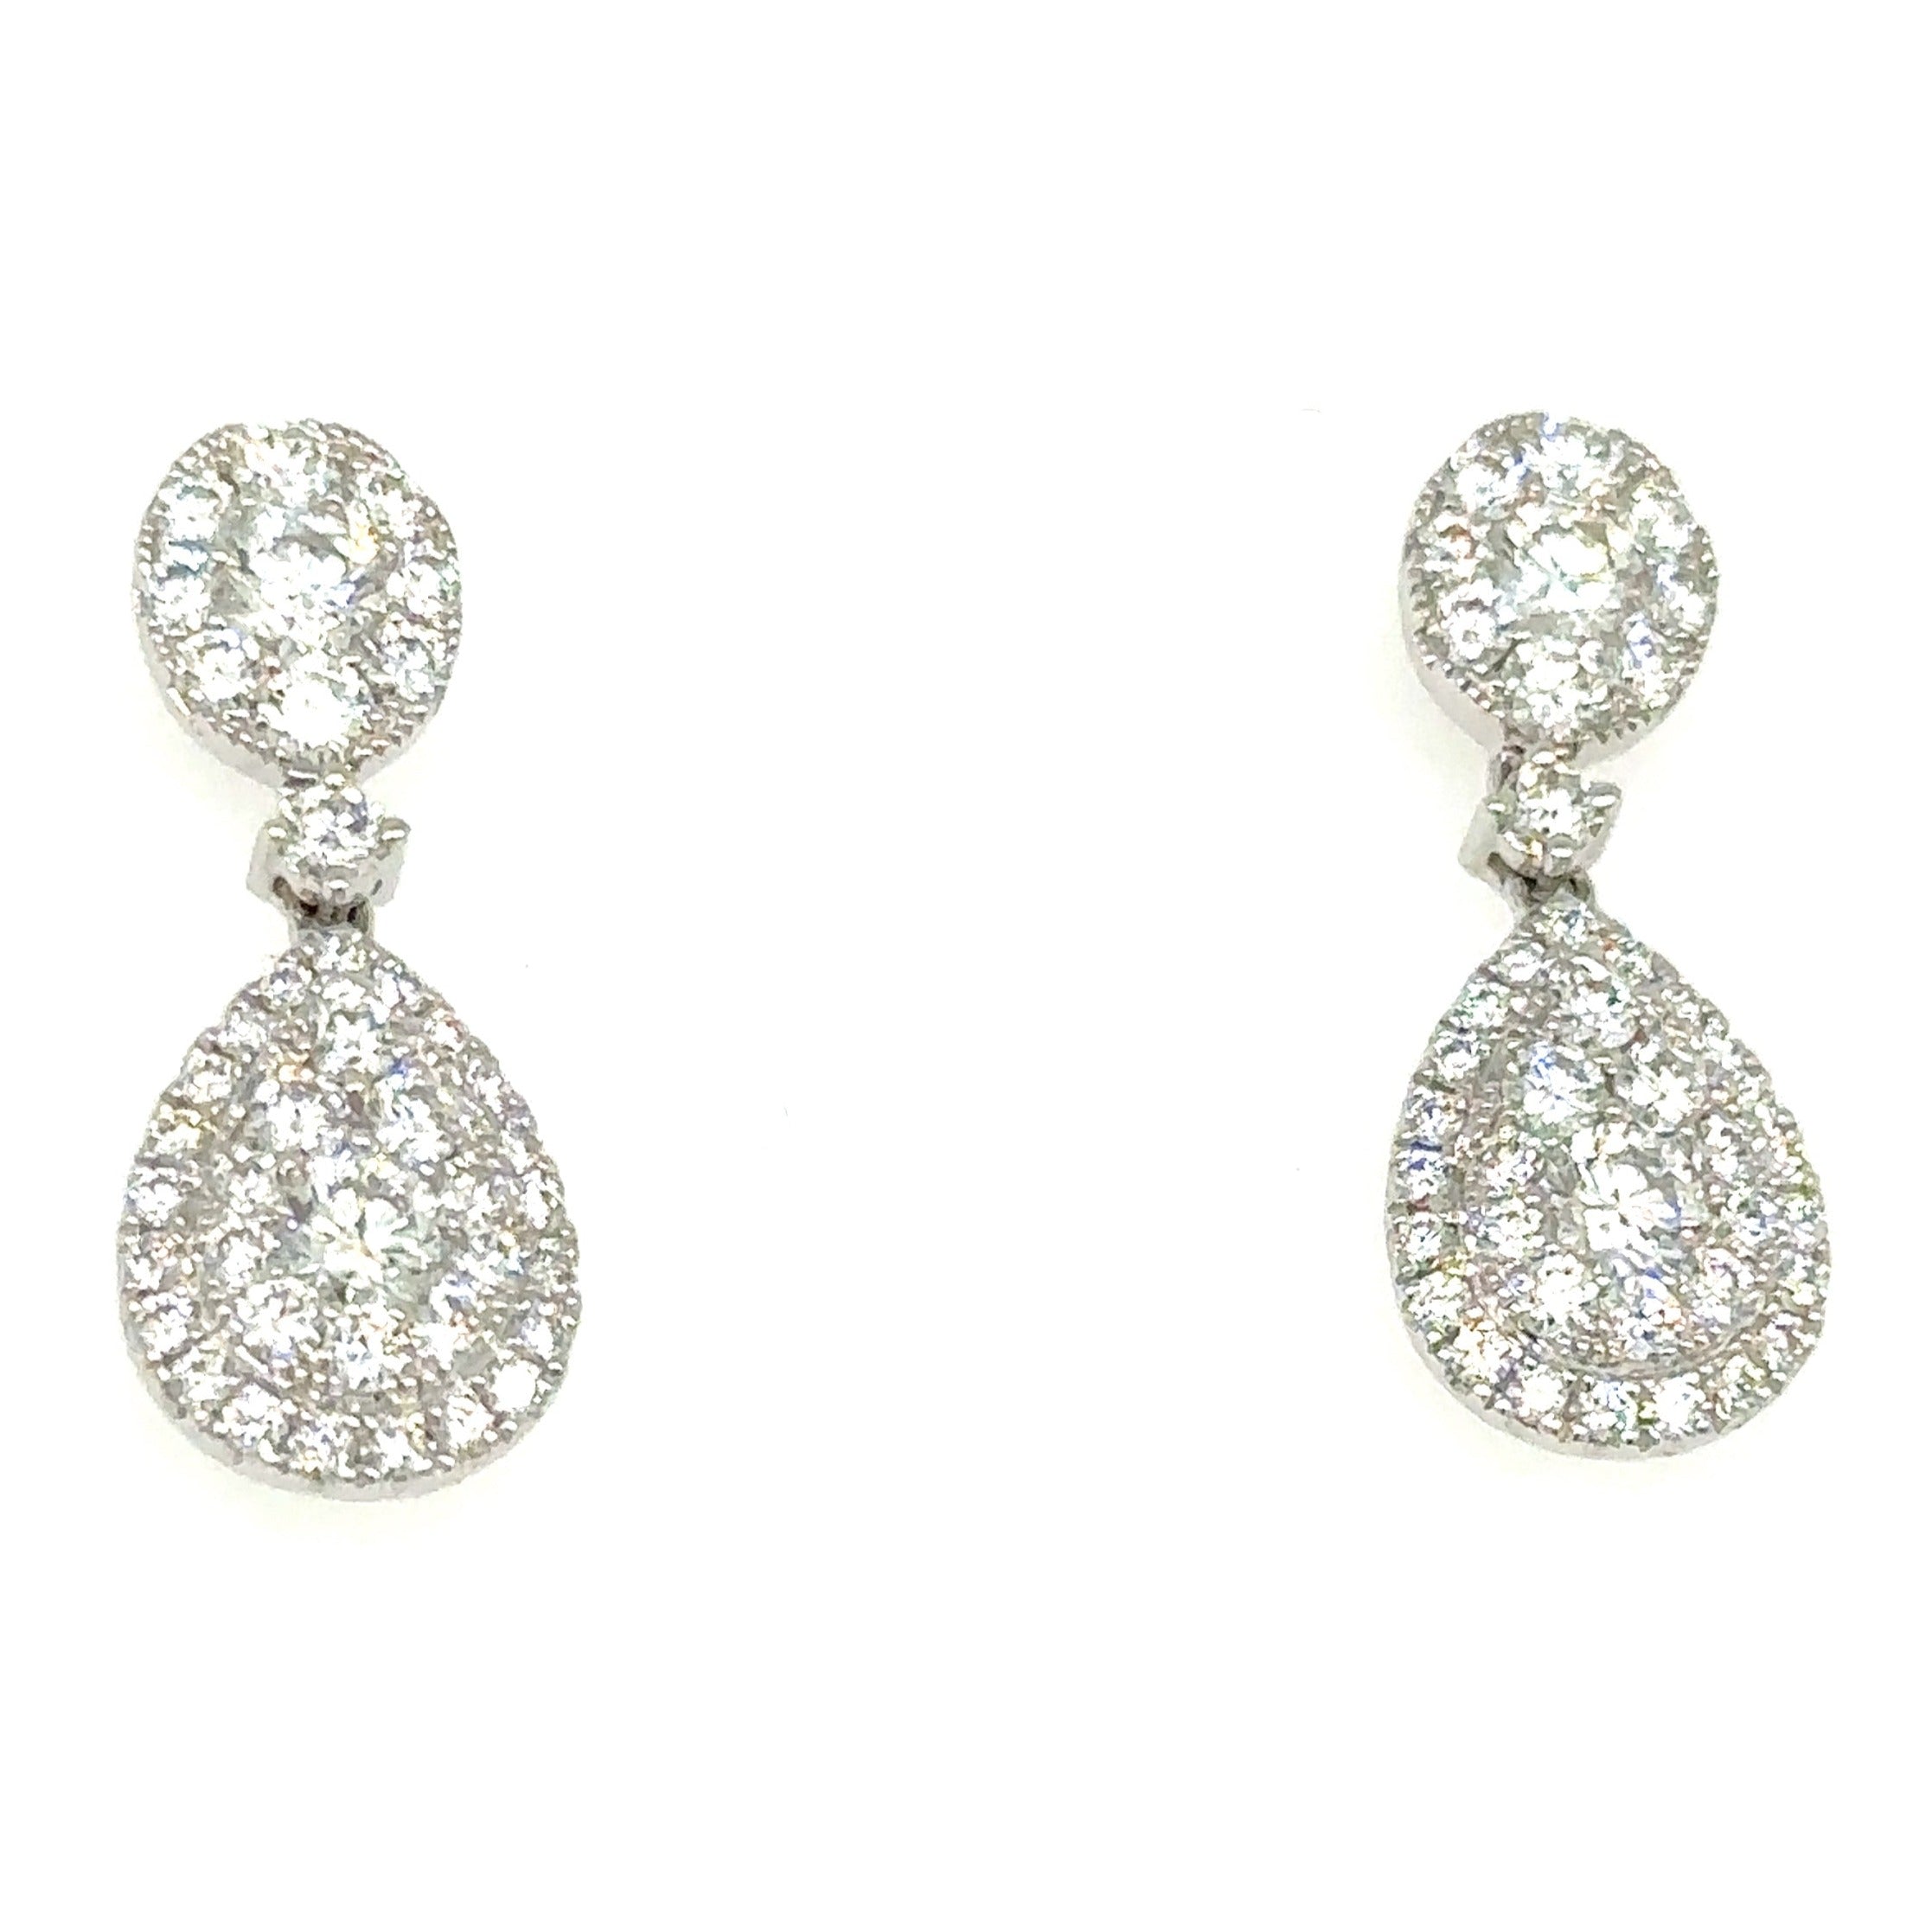 Pear Shape Diamond Invisible-set  Drop Statement Earrings 1.94ct tw